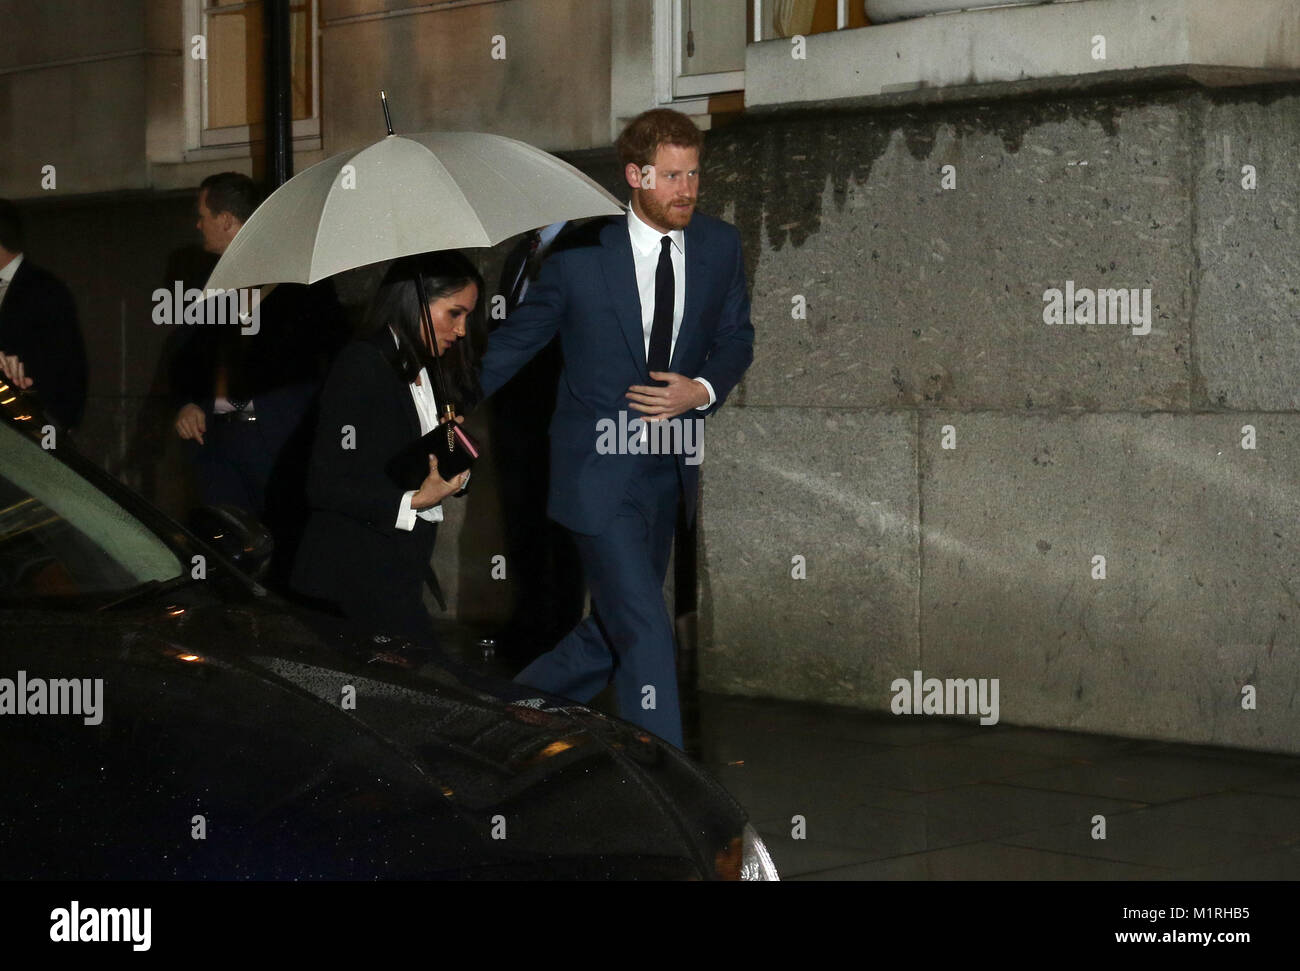 London, UK. 1st Feb, 2018. Meghan Markle and HRH Prince Harry (of Wales) attending the Endeavour Fund Awards at Goldsmiths' Hall, London  on February 1, 2018 Credit: Paul Marriott/Alamy Live News Stock Photo